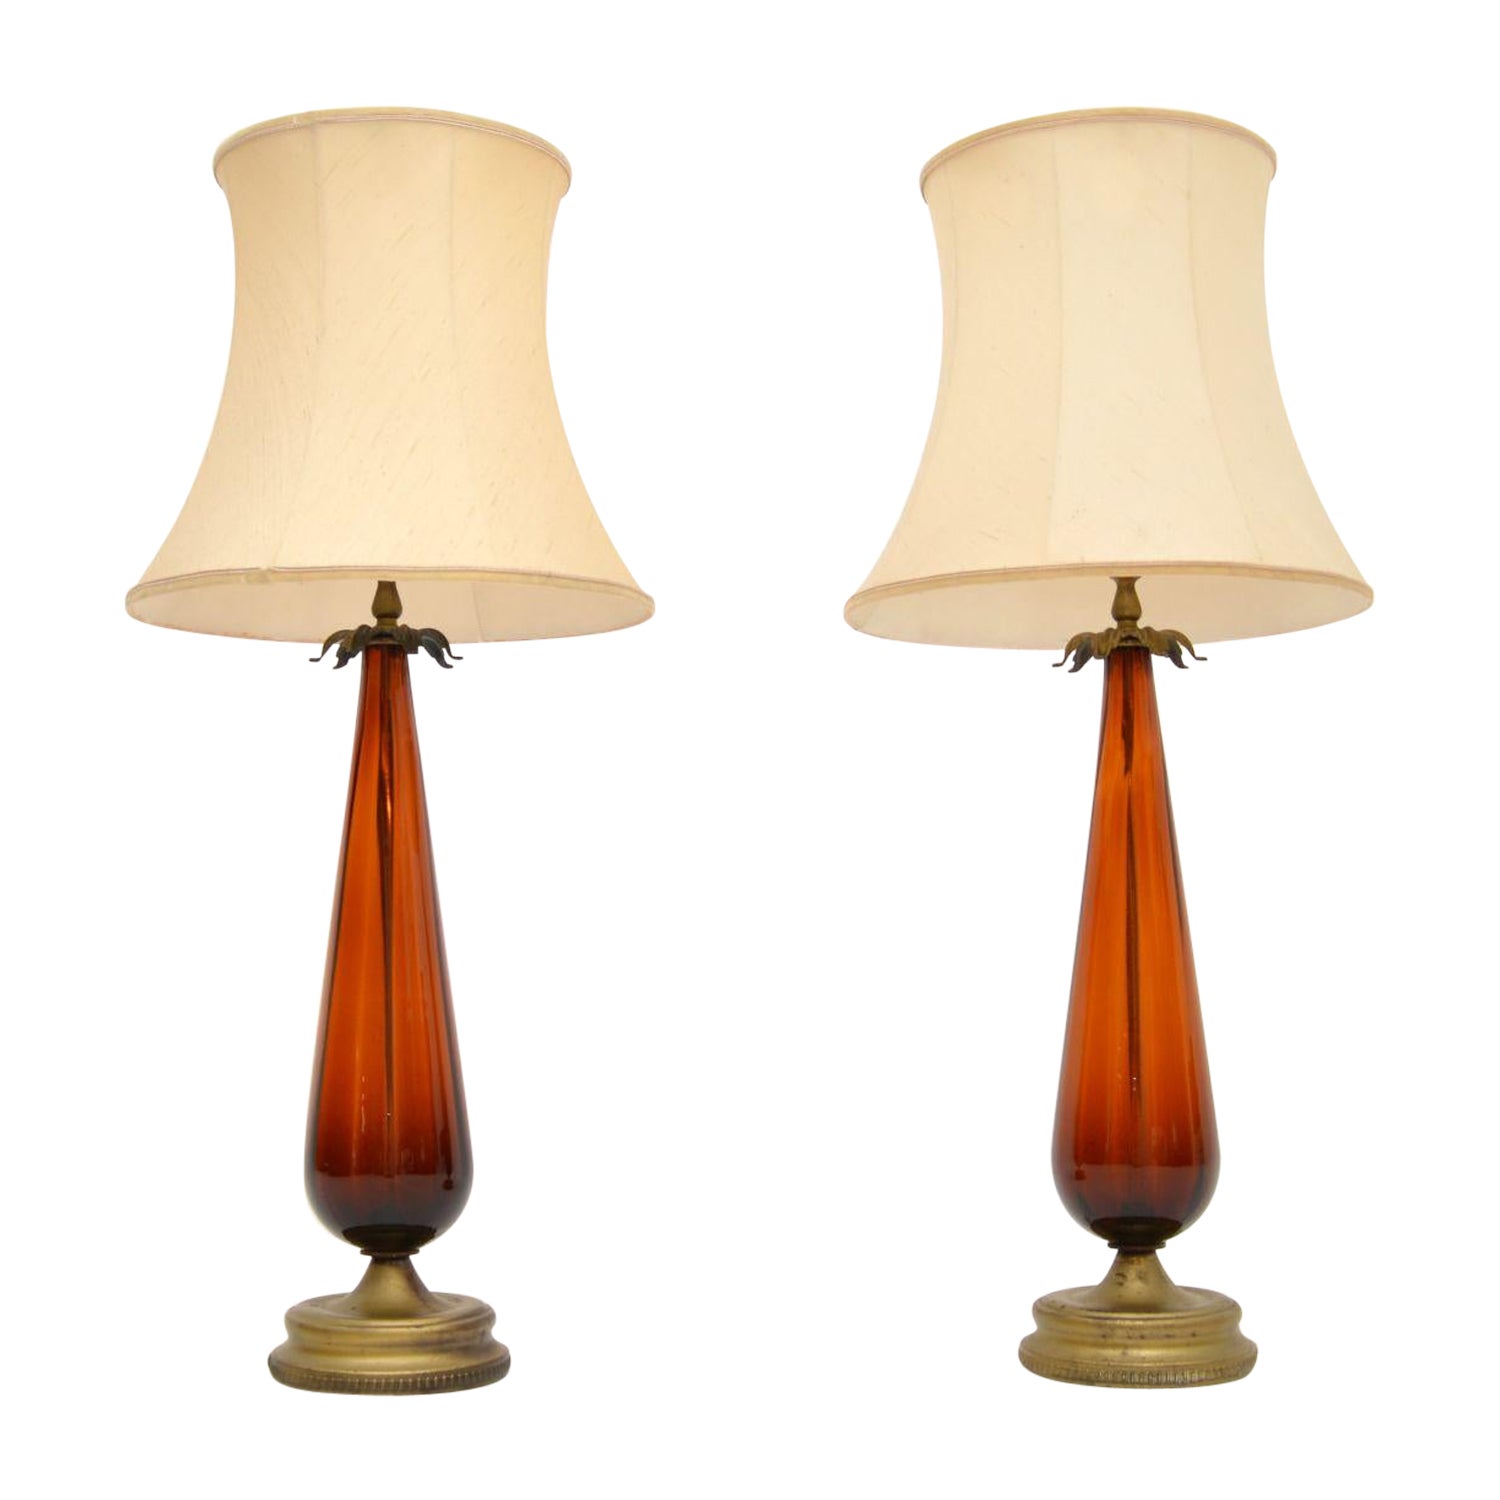 Large Pair of Art Deco Glass Table Lamps